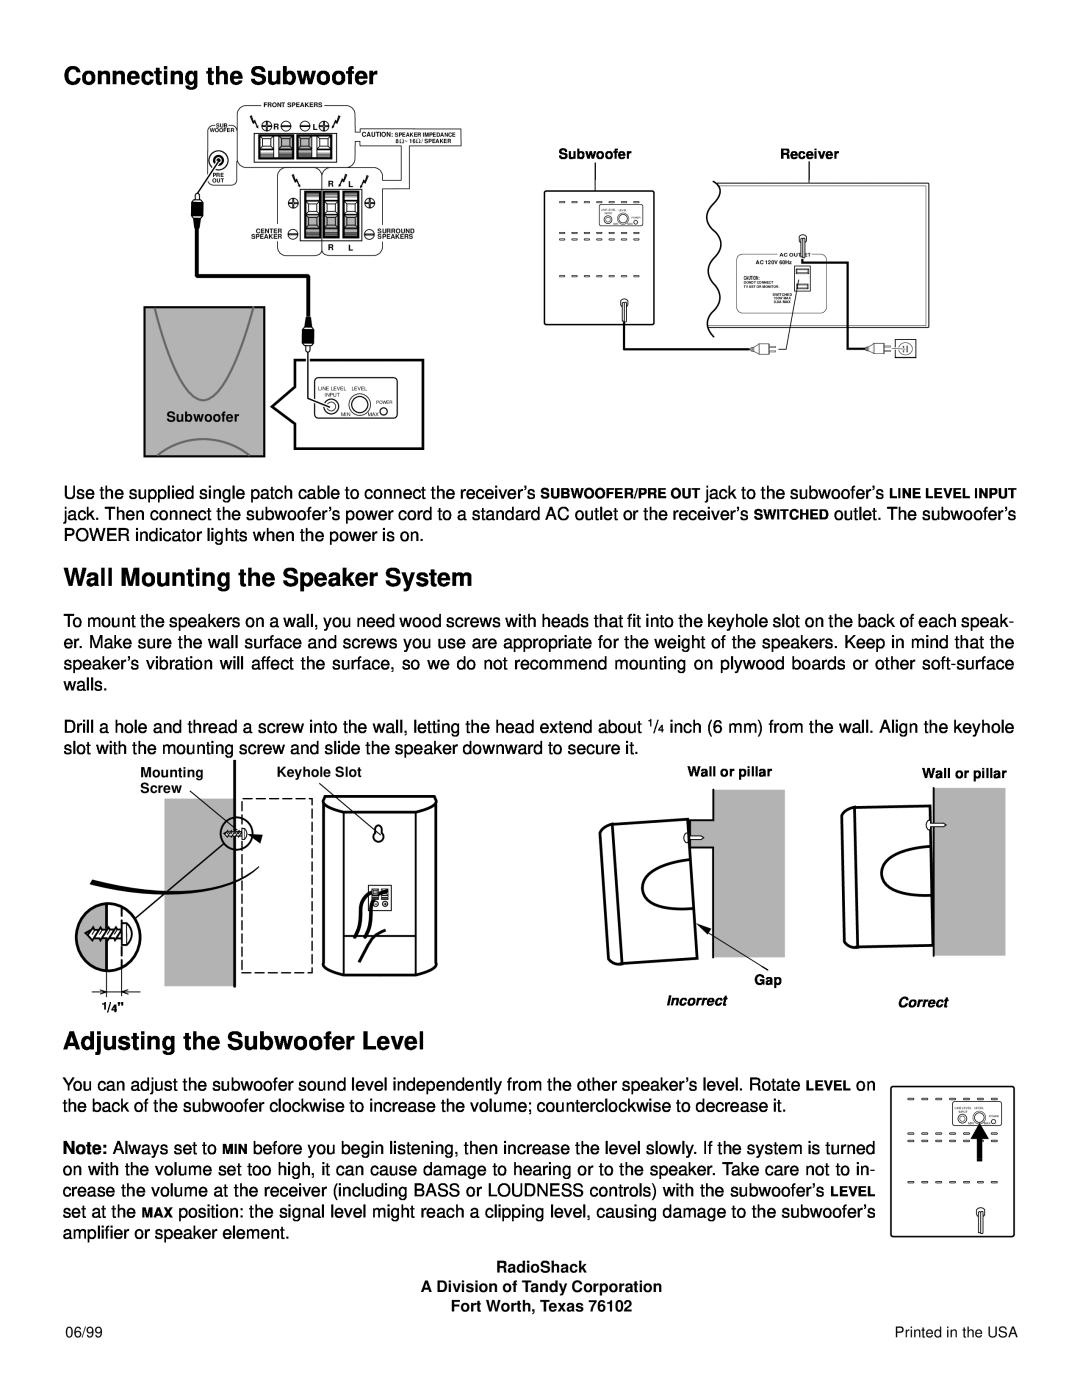 Optimus 31-3044 specifications Connecting the Subwoofer, Wall Mounting the Speaker System, Adjusting the Subwoofer Level 